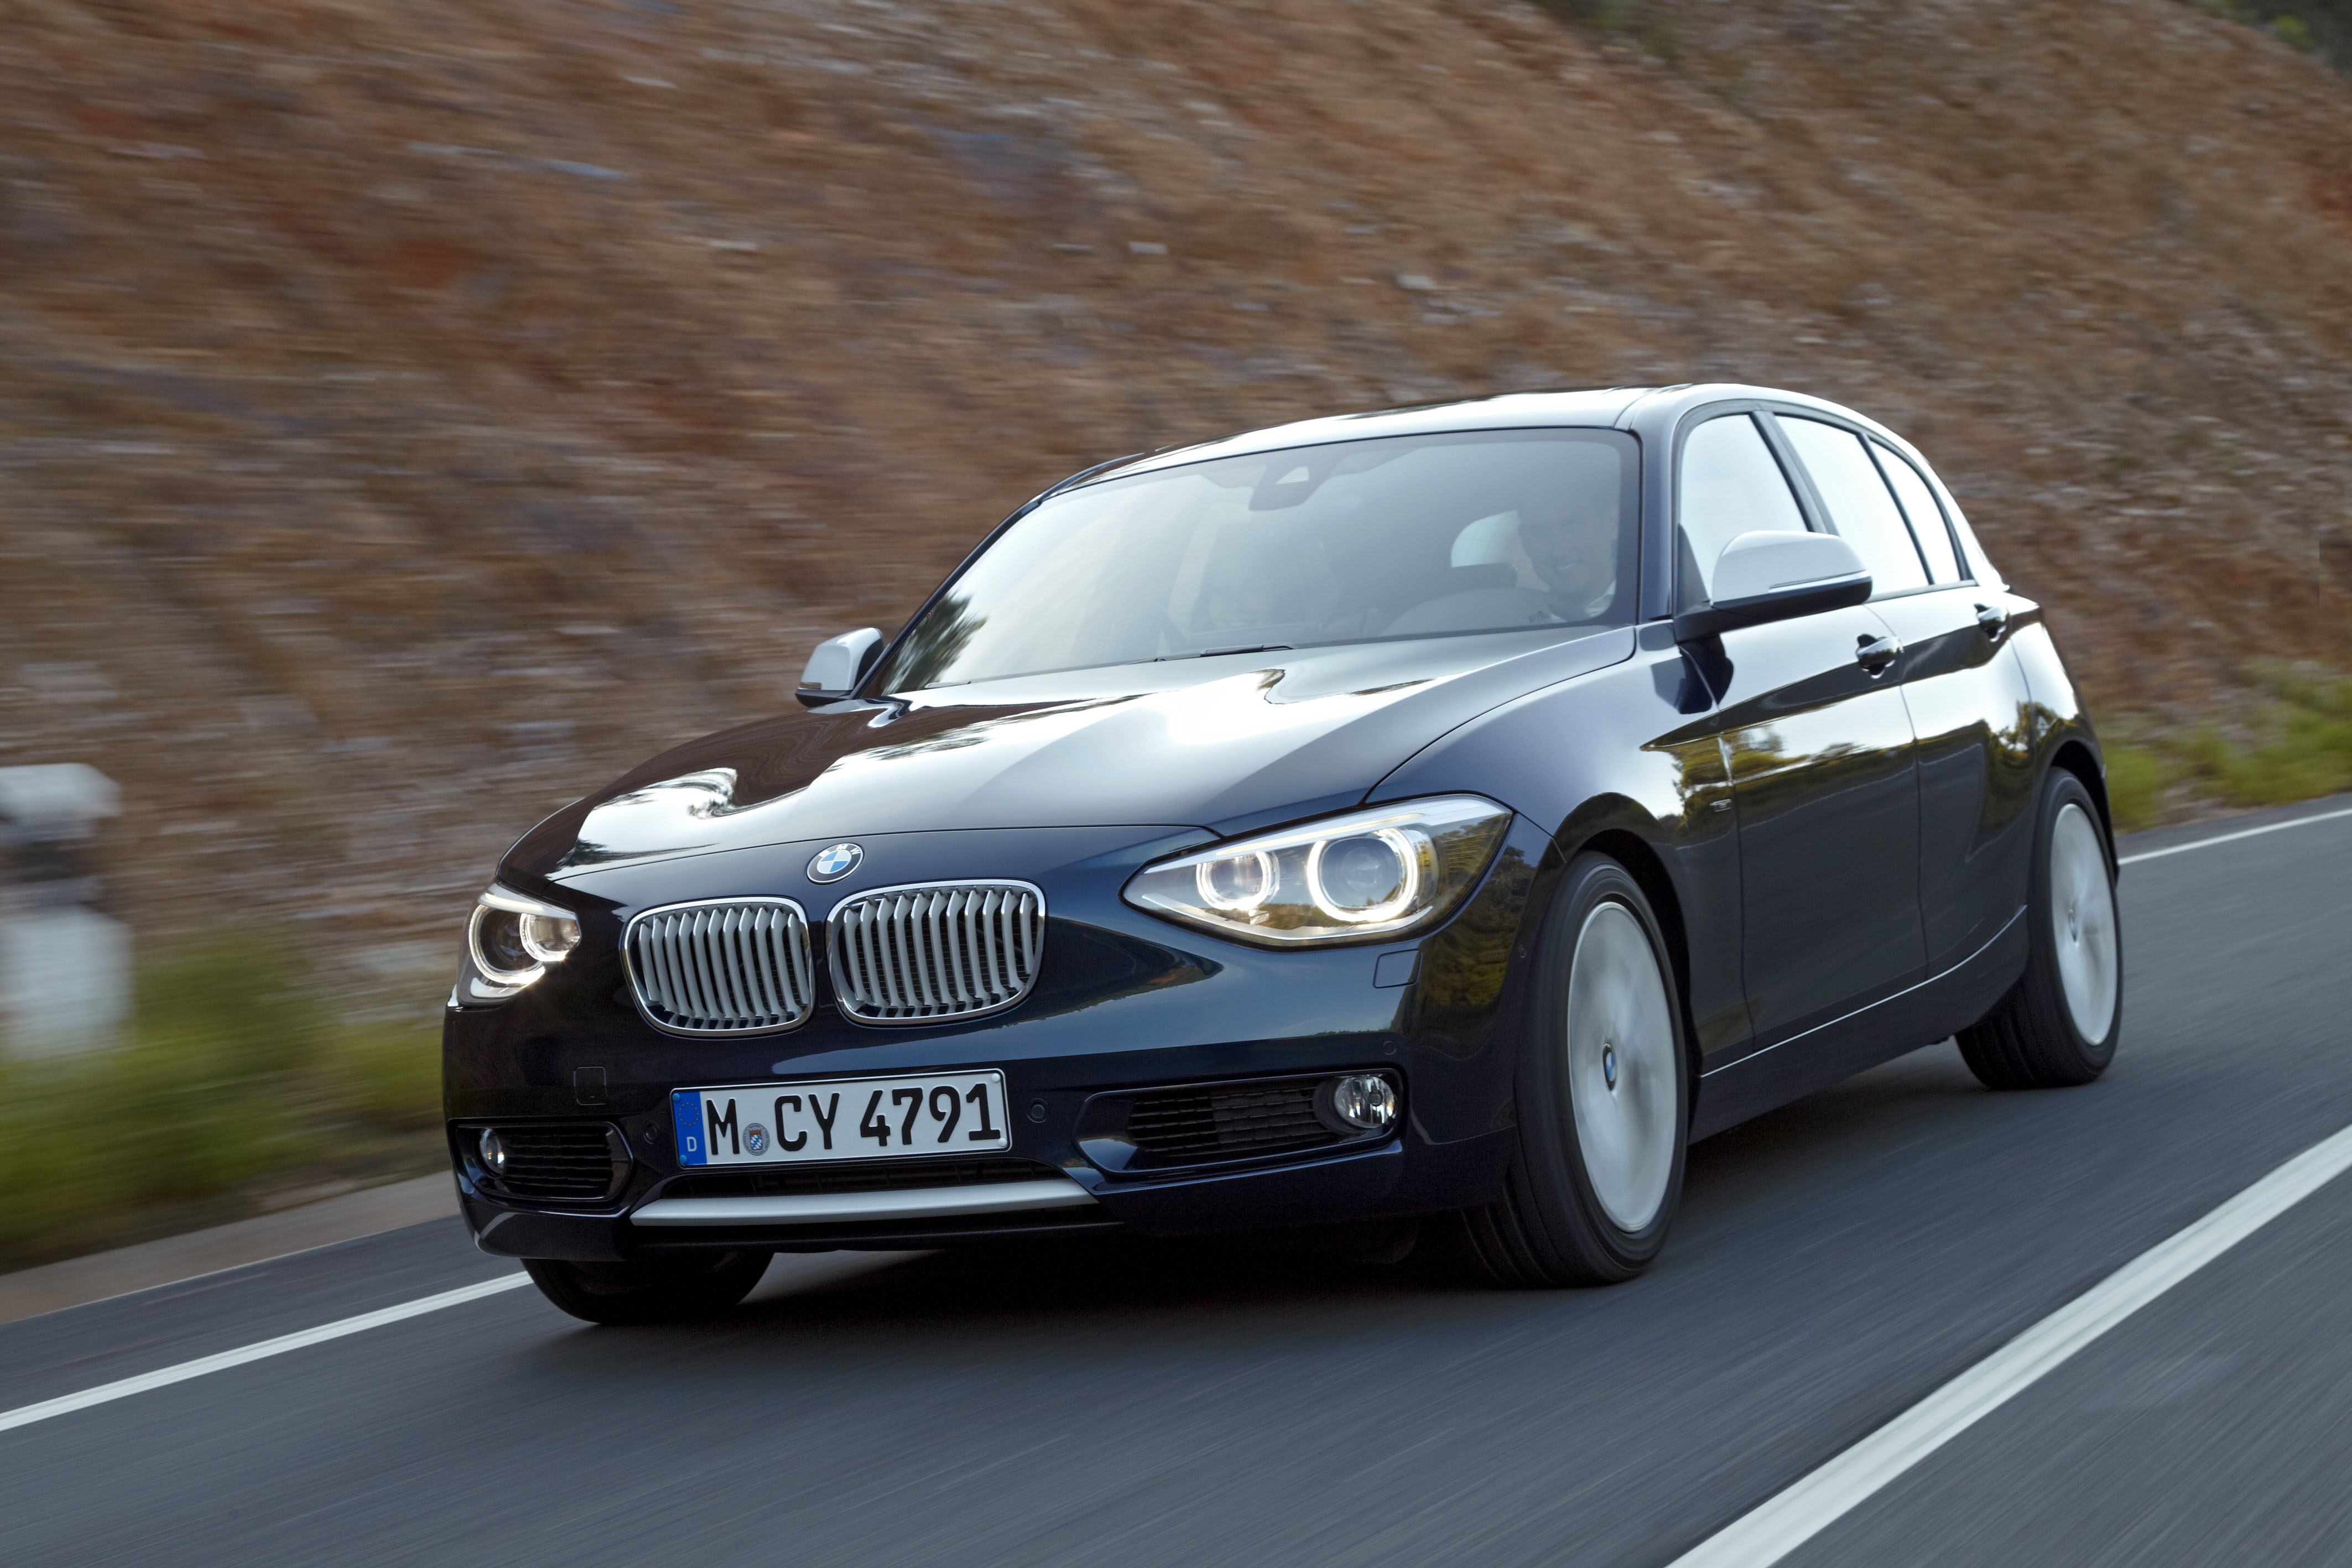 2012 BMW 1Series (F20) unveiled details and photos The